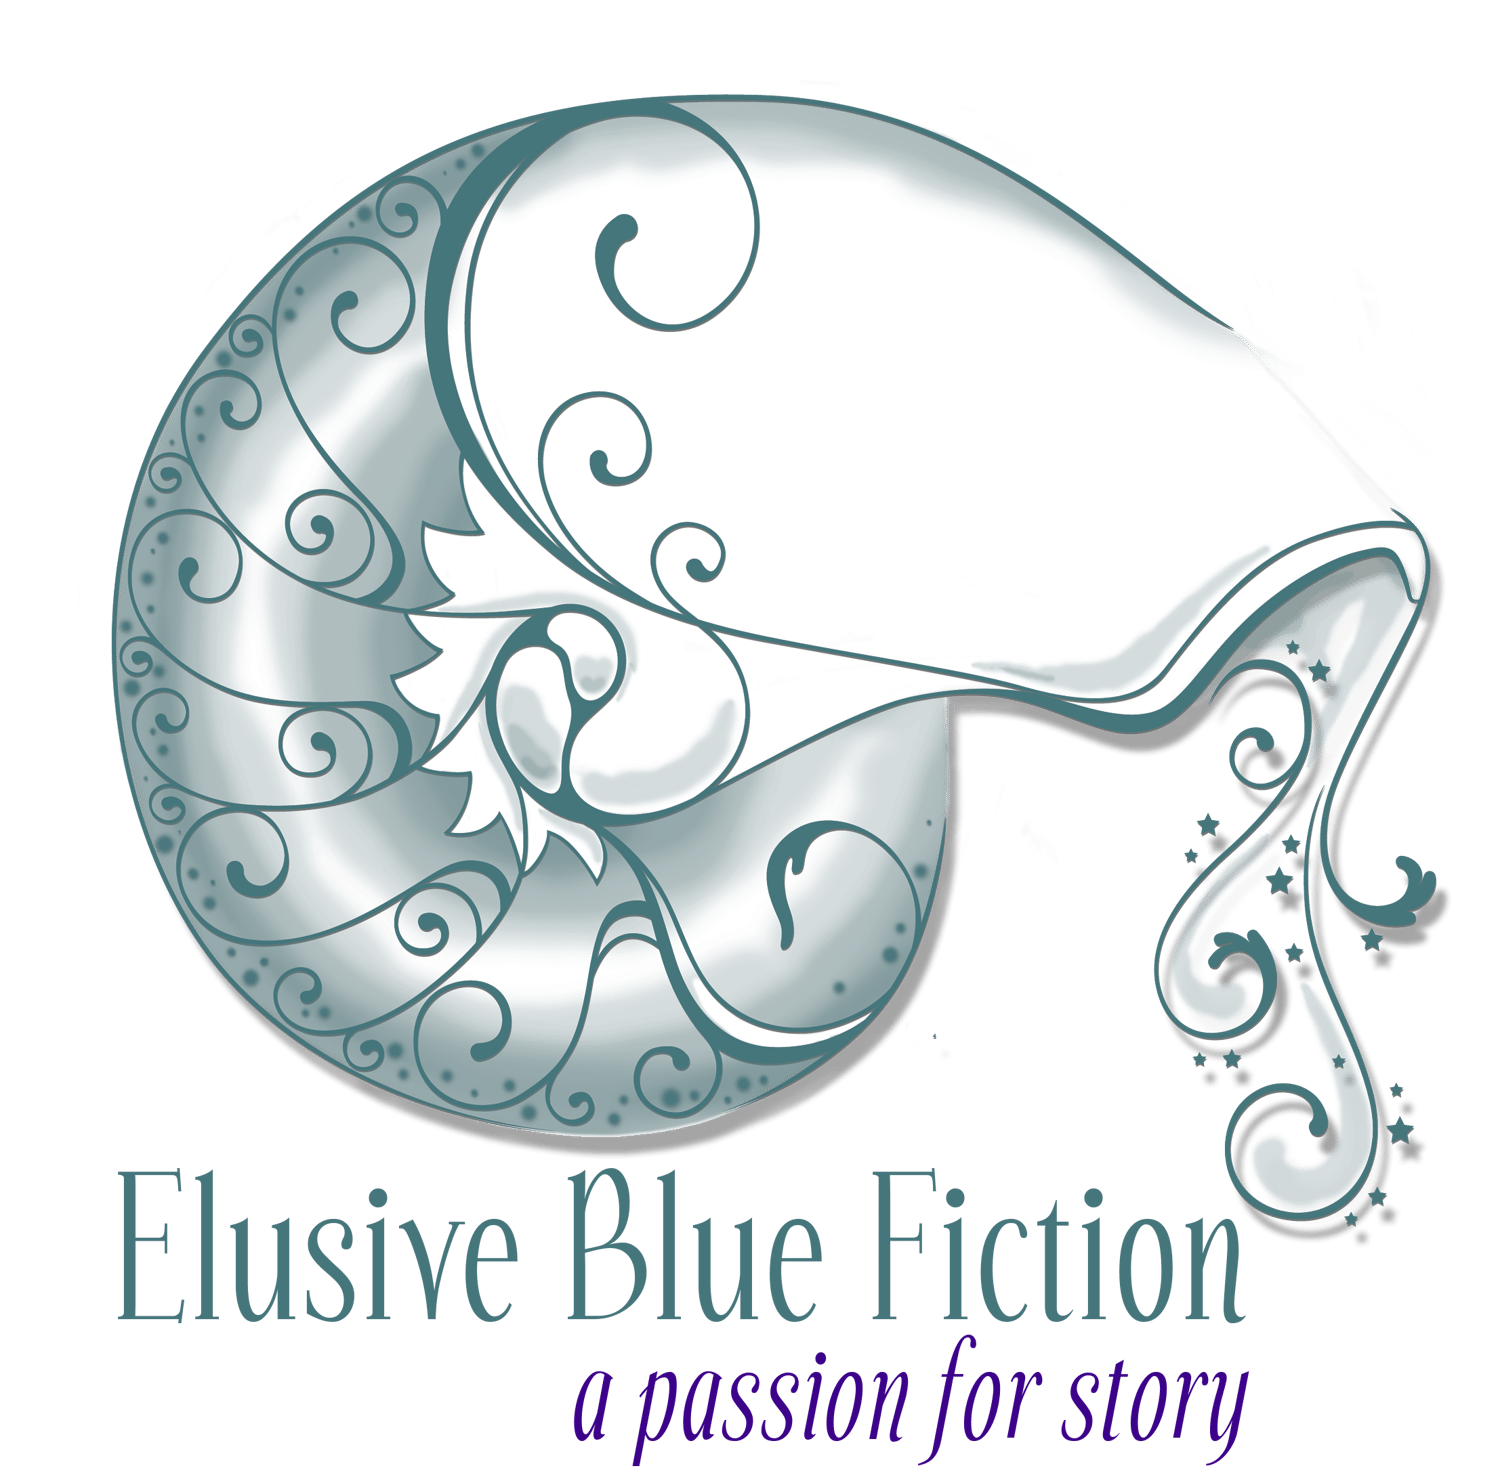 Elusive Blue Fiction—a passion for story